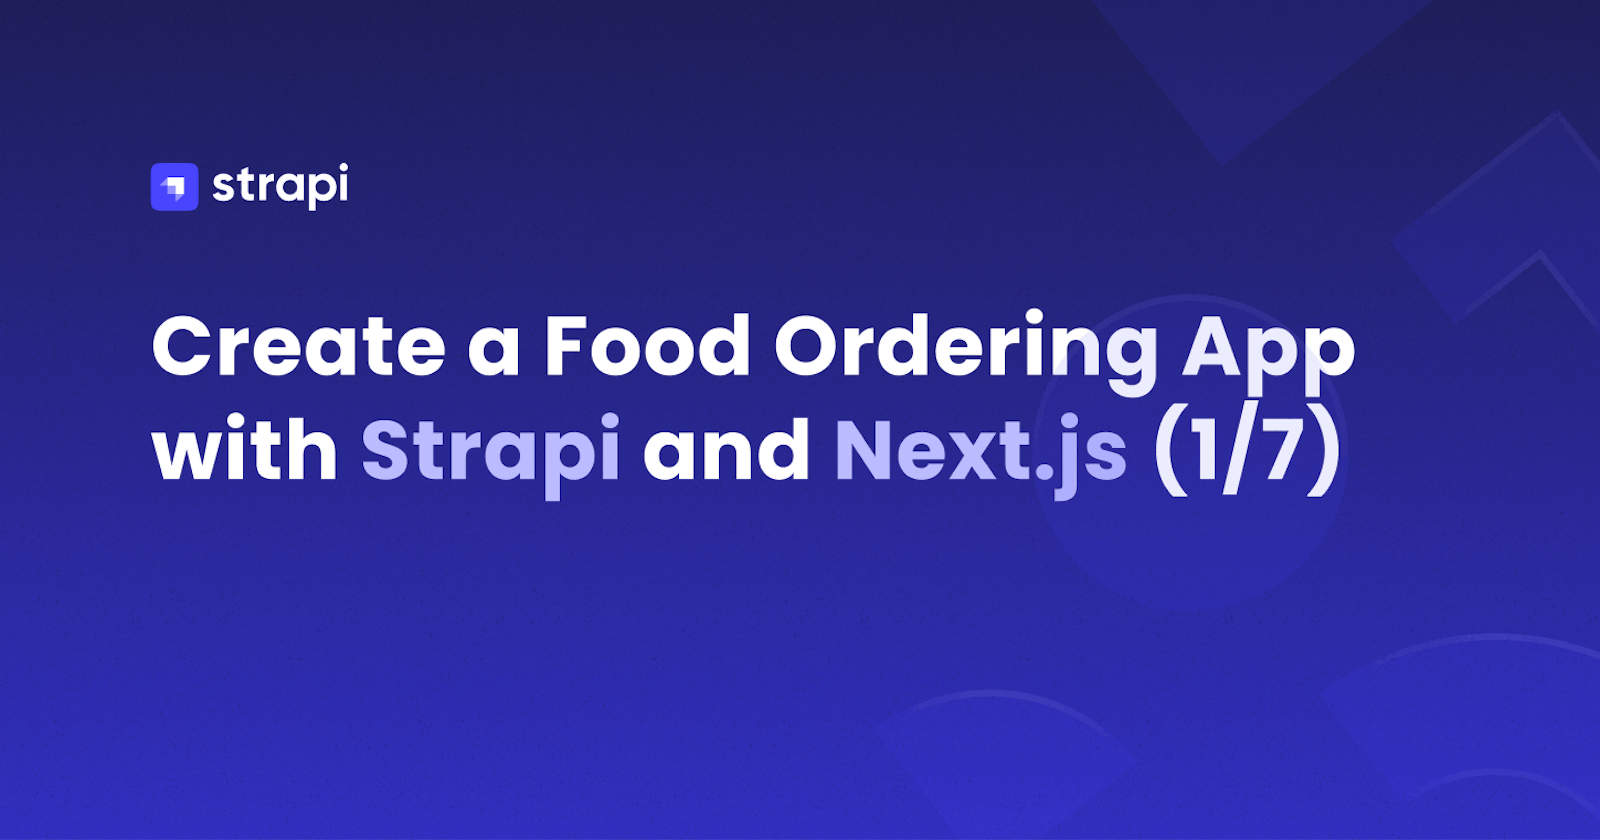 Create a Food Ordering App with Strapi and Next.js 1/7